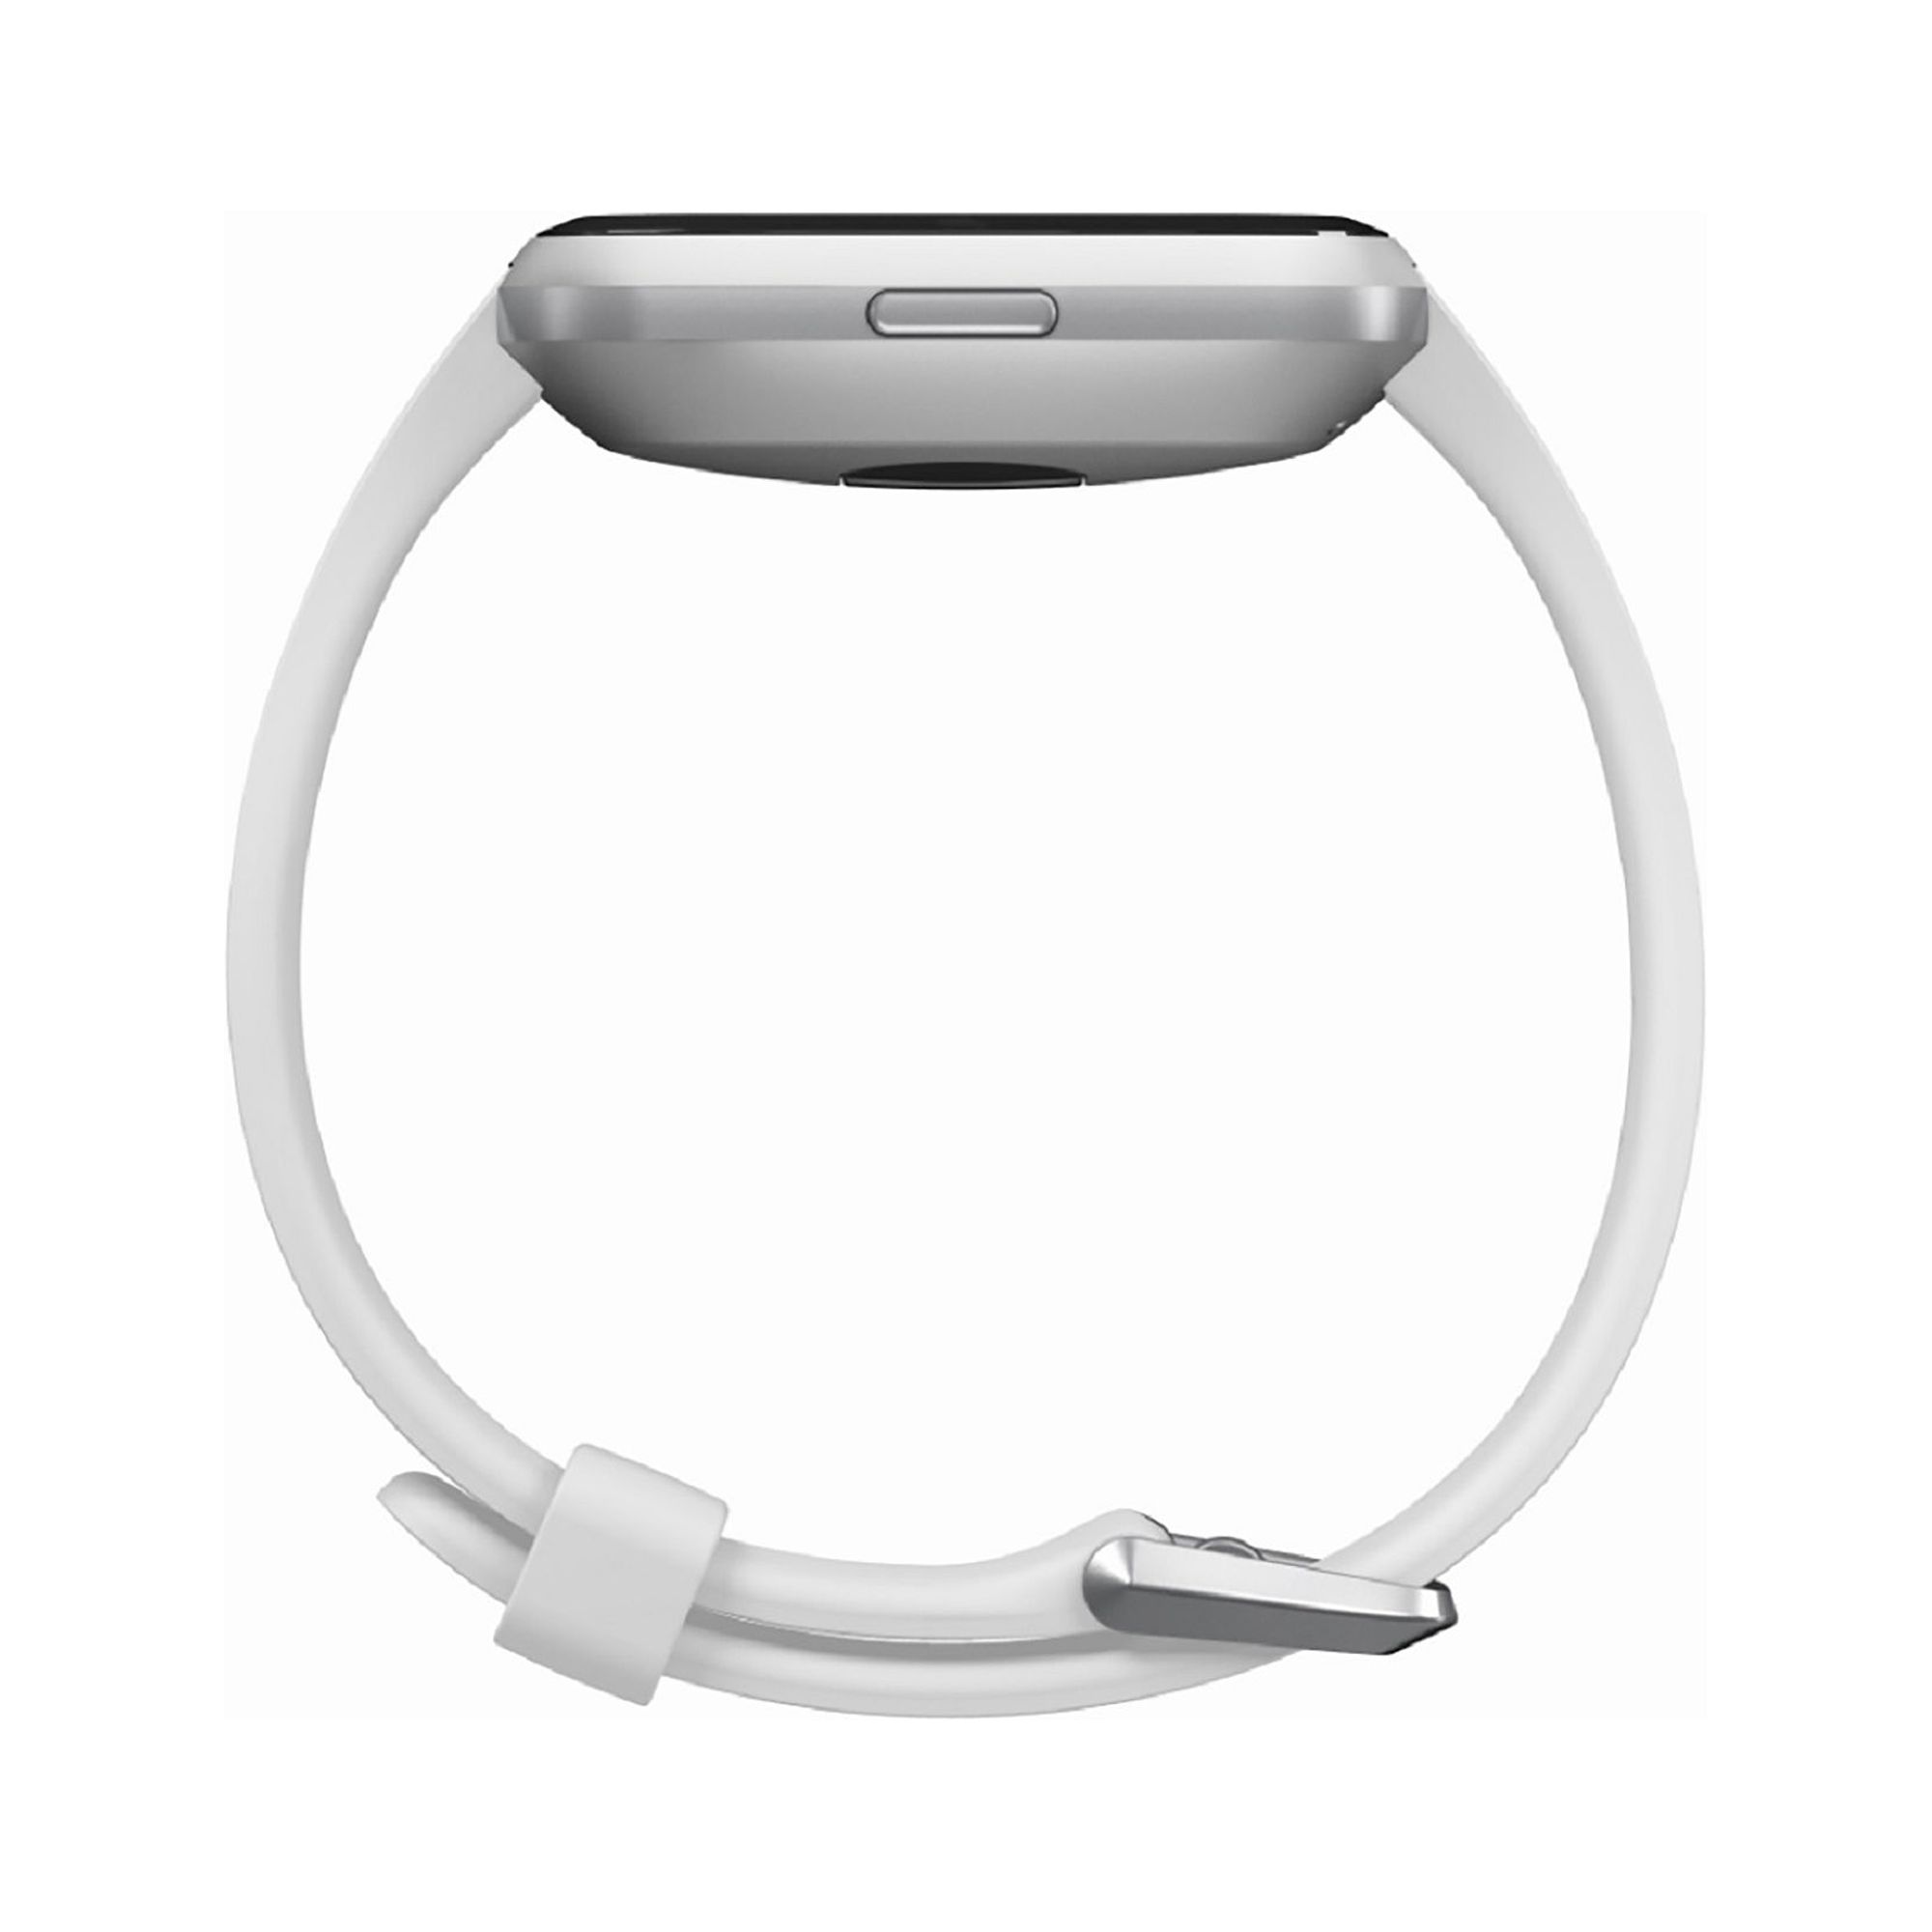 Restored Fitbit FB415SRWT Versa Smart Watch, One Size (S & L Bands Included) White/Silver Aluminum Lite Edition (Refurbished) - image 2 of 4